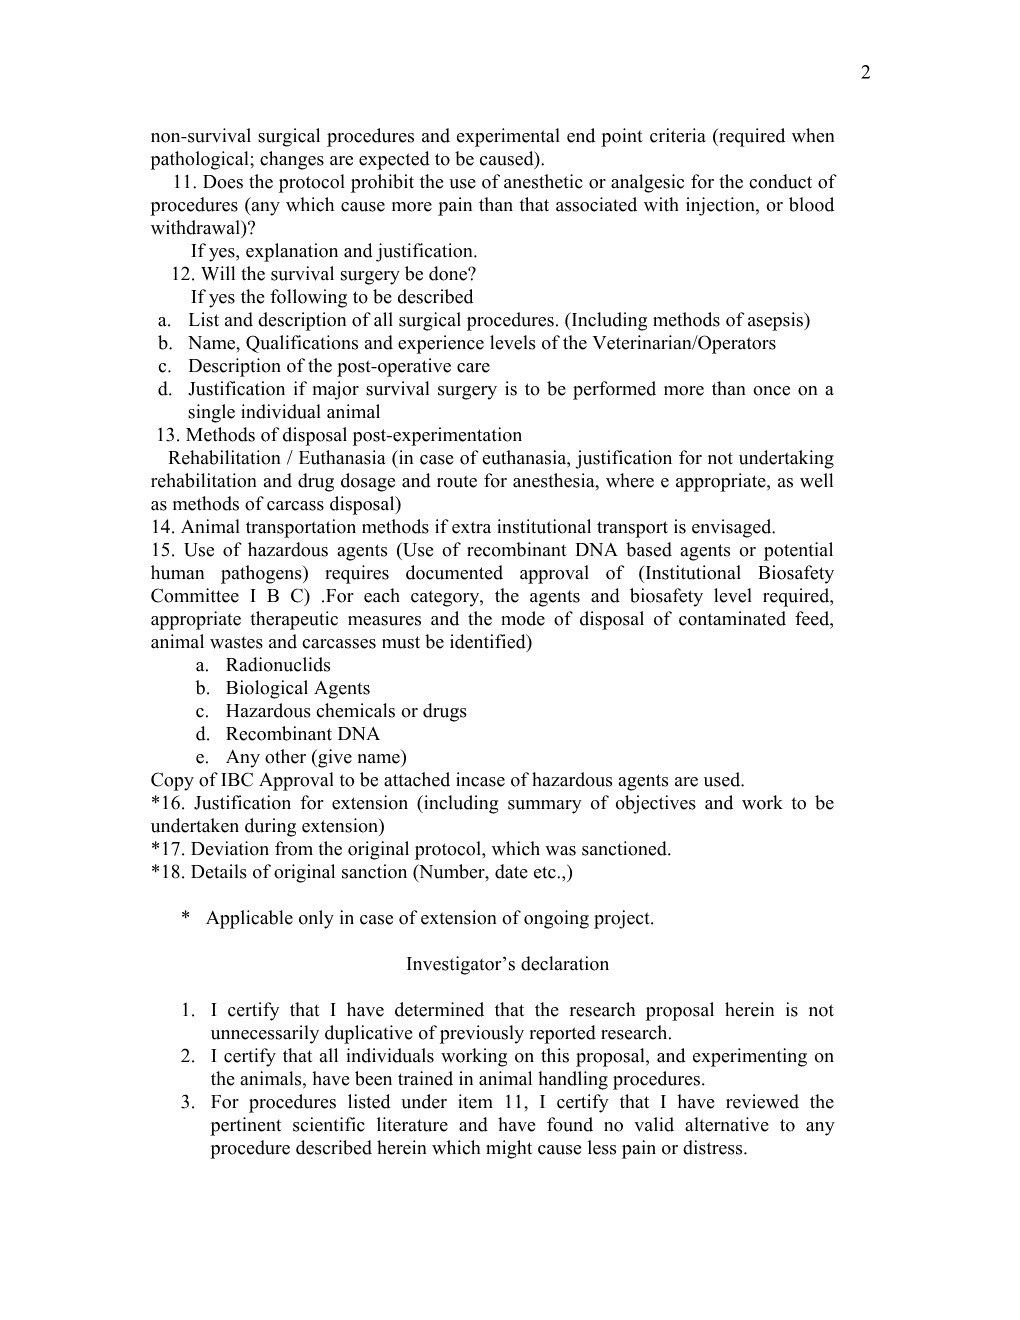 Protocol Form for Use of Animals in New Experiments Or Extension of Ongoing Experiments